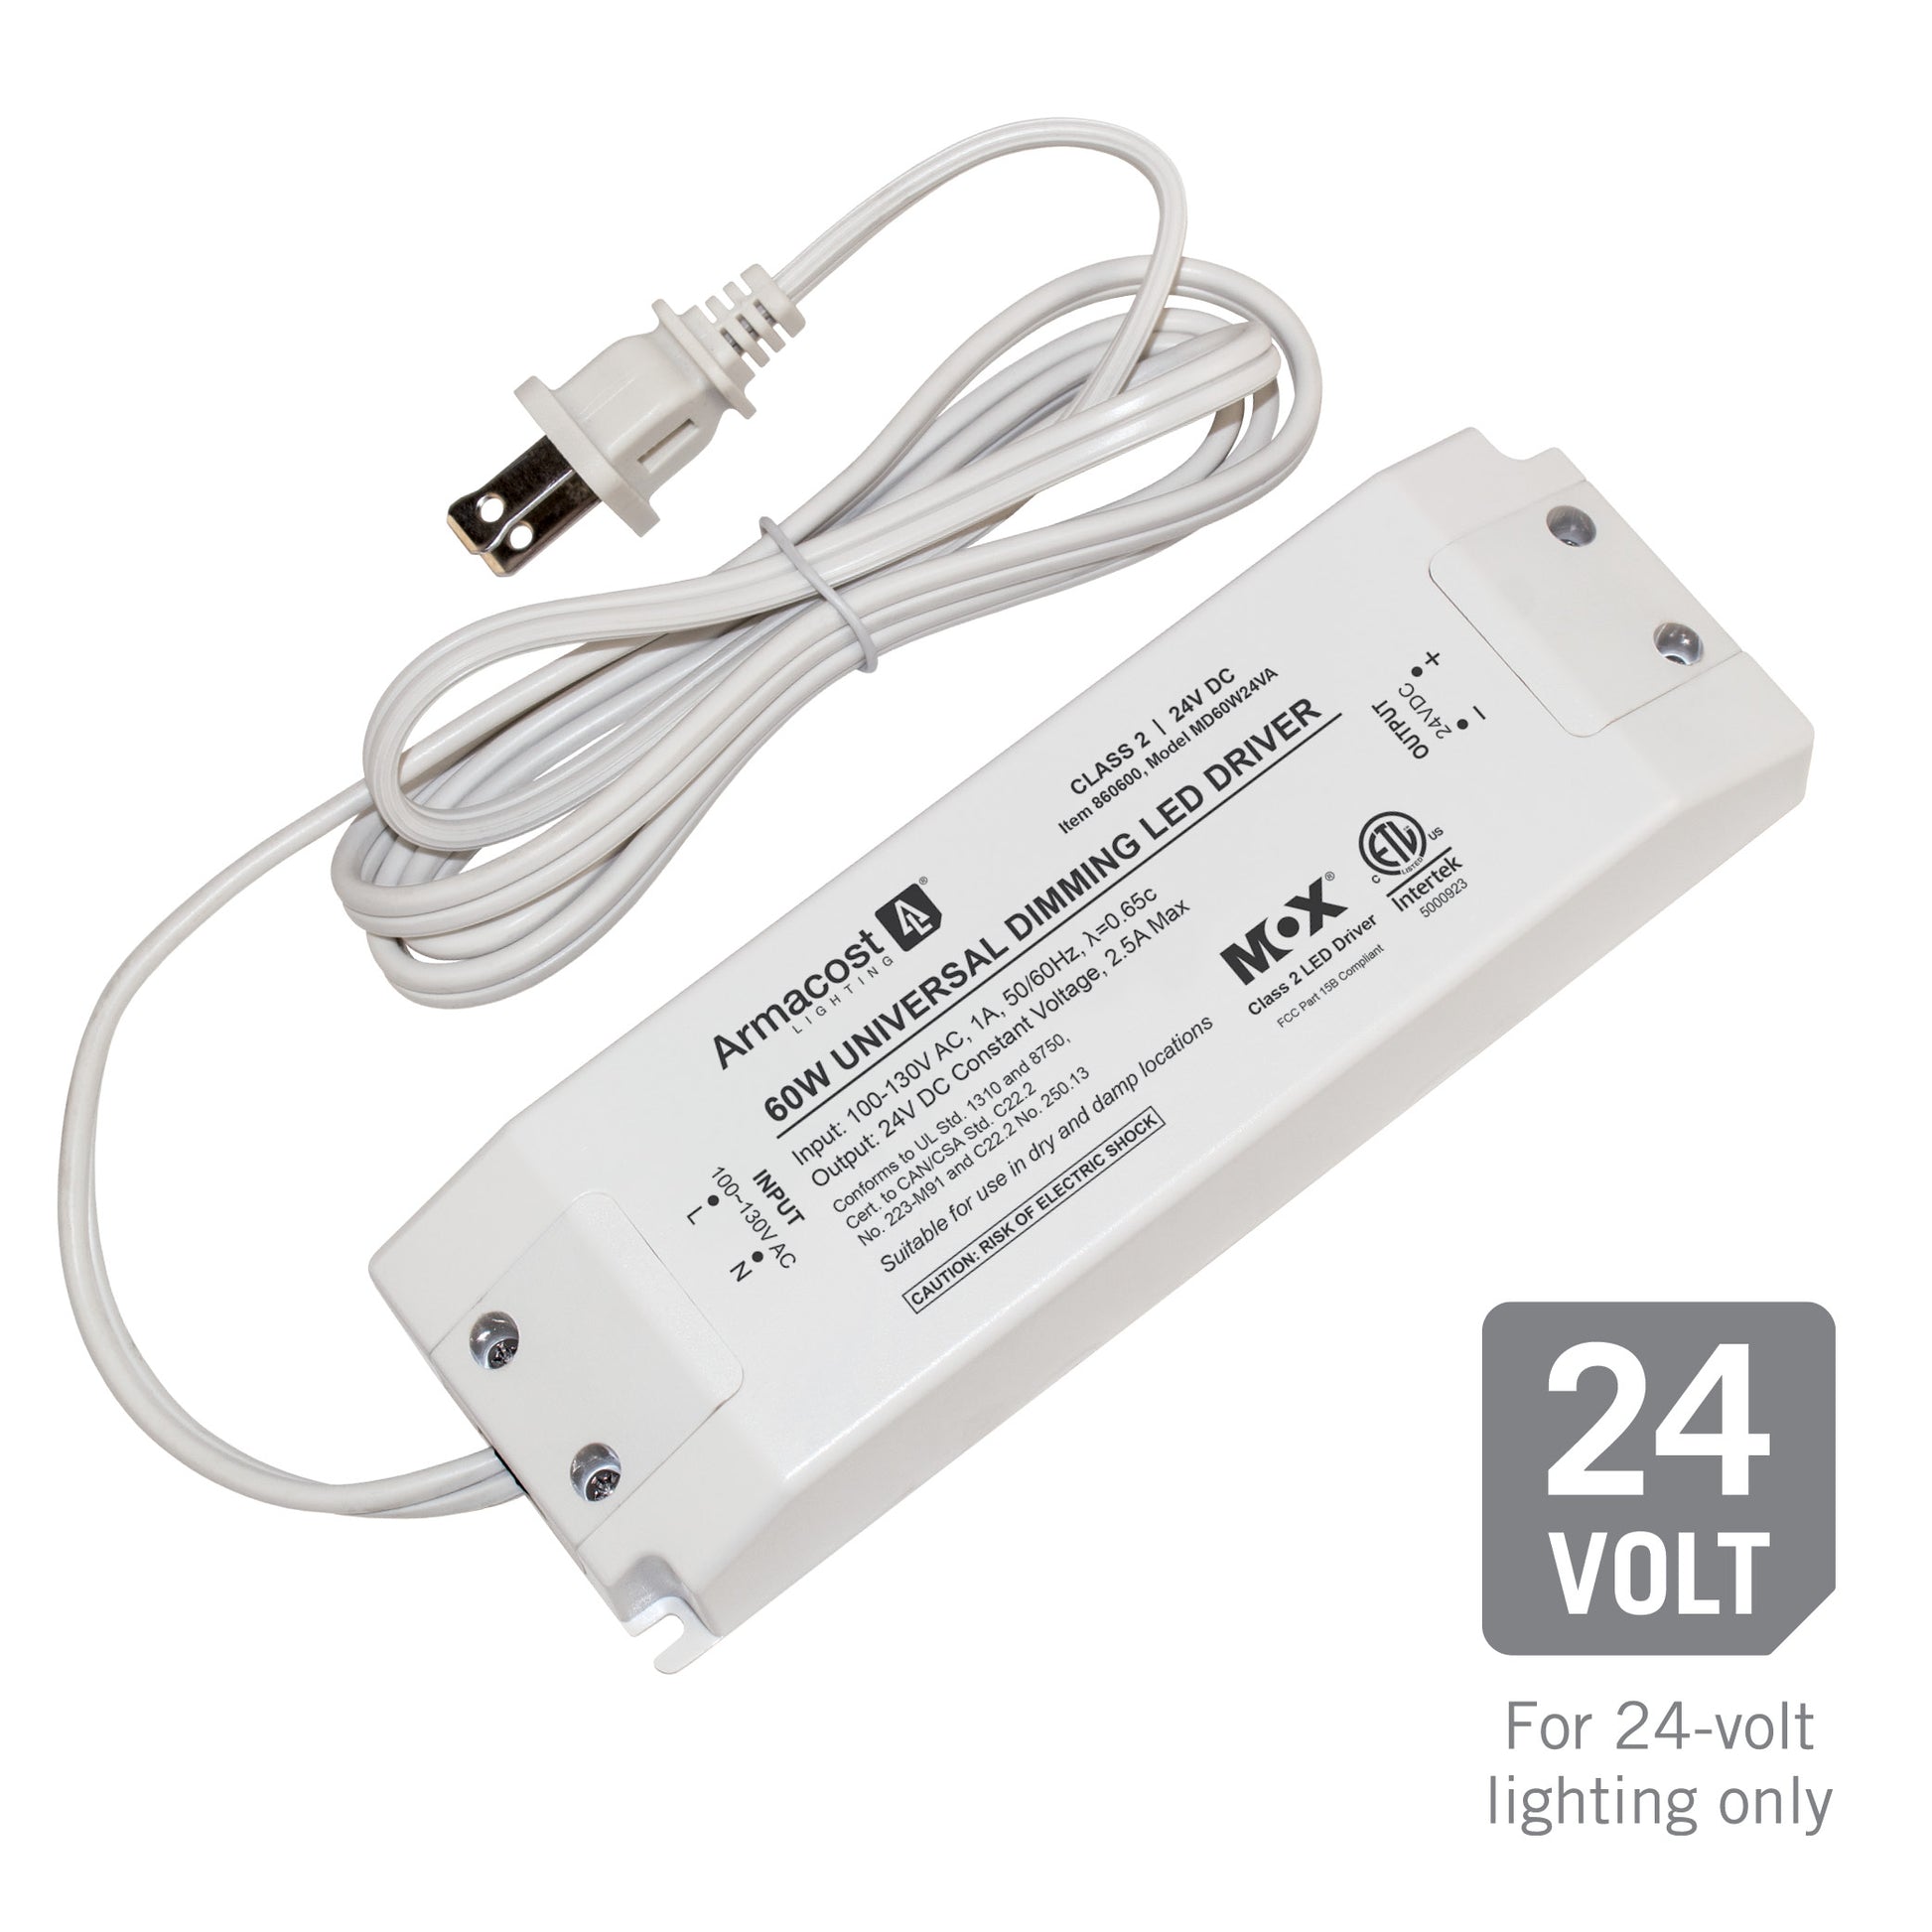 Denk vooruit strand Universeel Universal Dimmable LED Driver 24V DC – Armacost Lighting